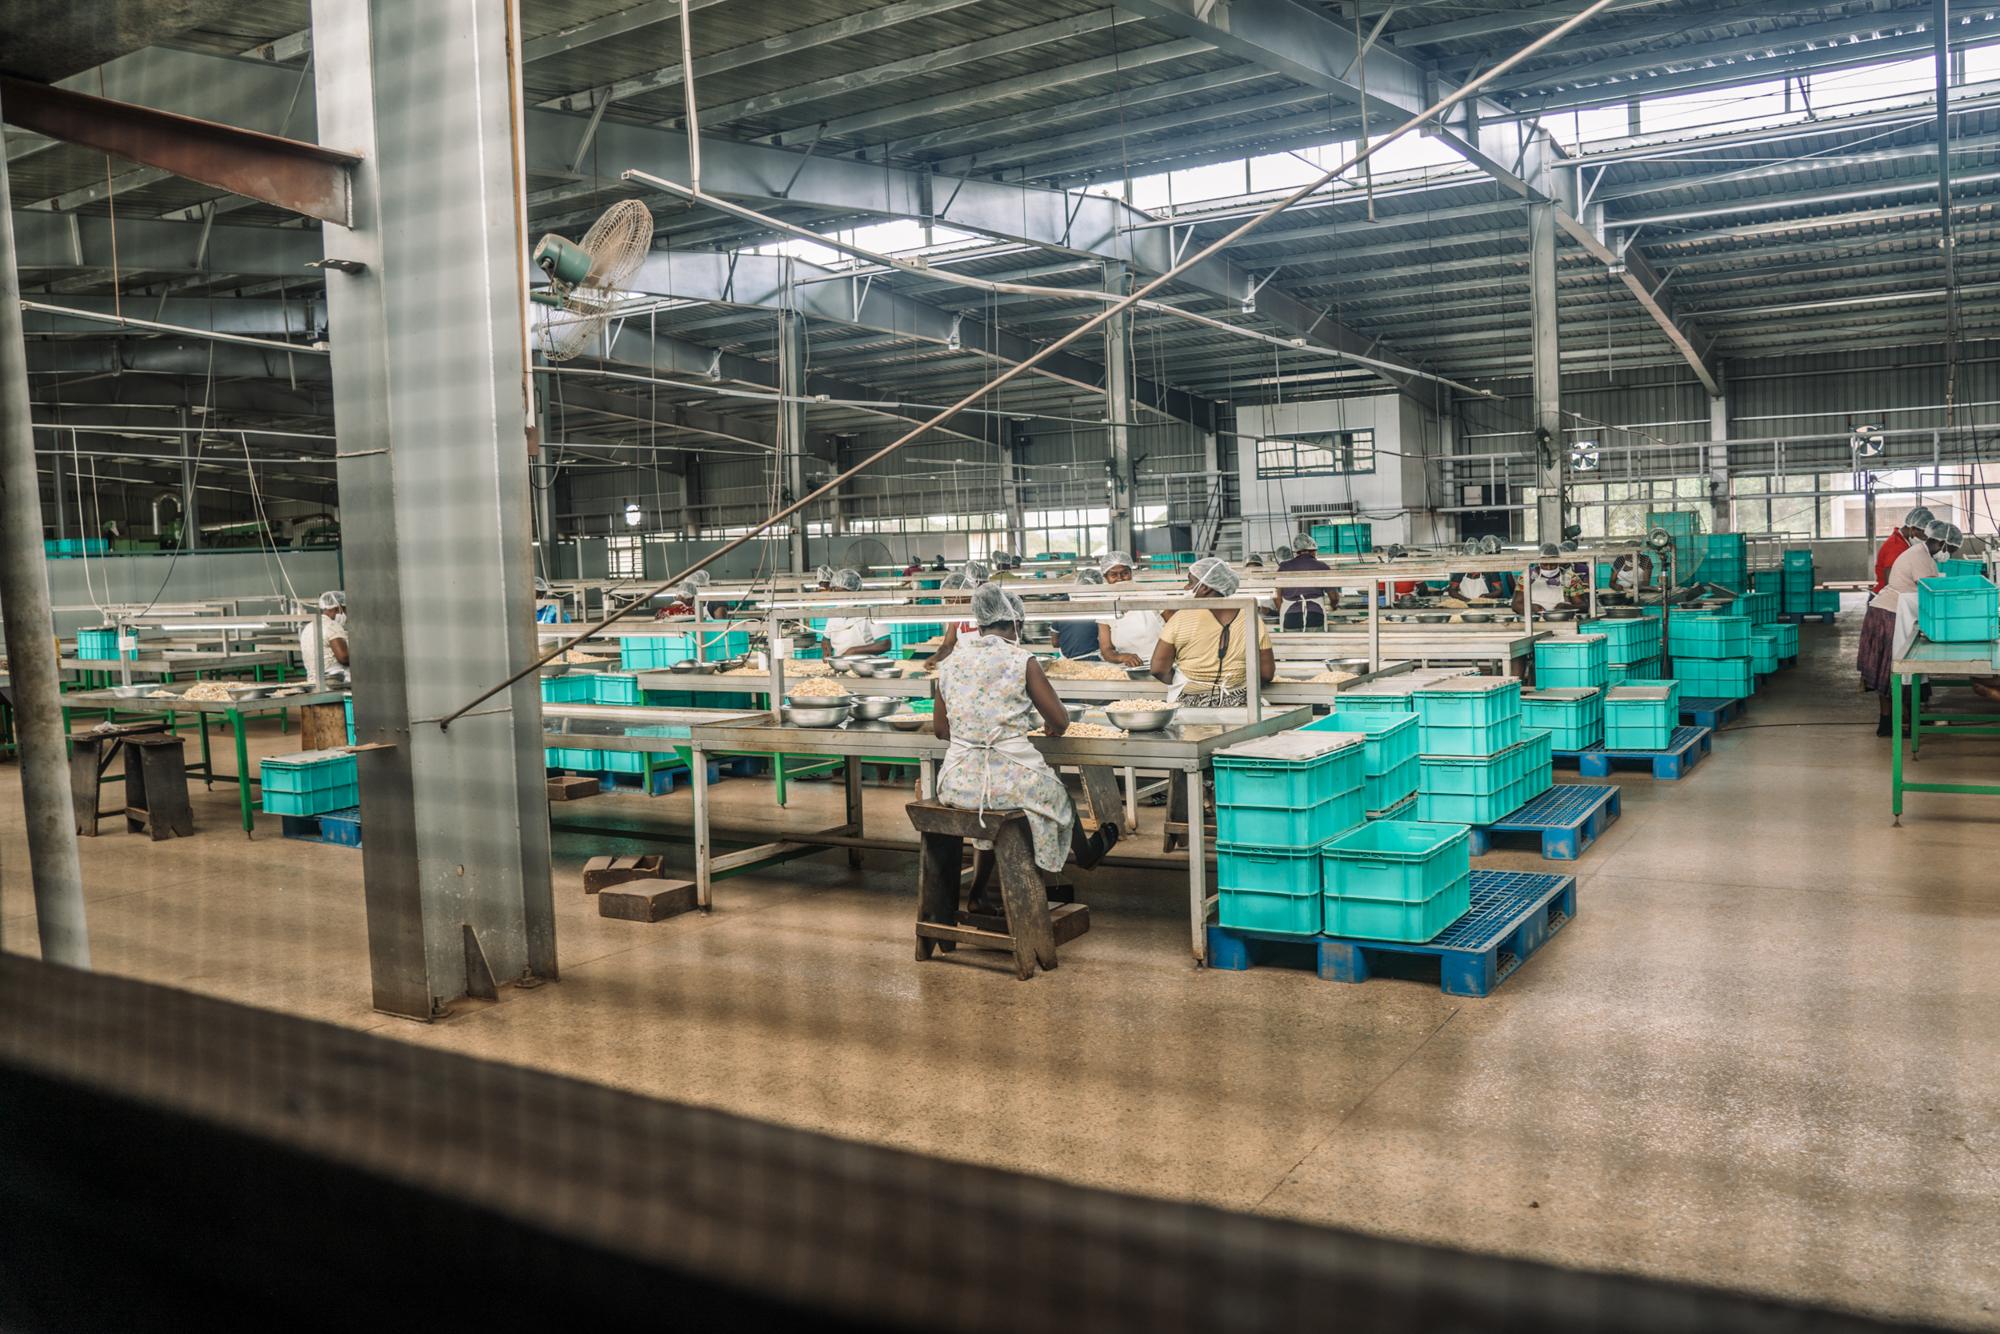 95% of workers at he Mim Cashew Factory are women. So far, the project has yielded positive results - especially a notable increase amongst the...